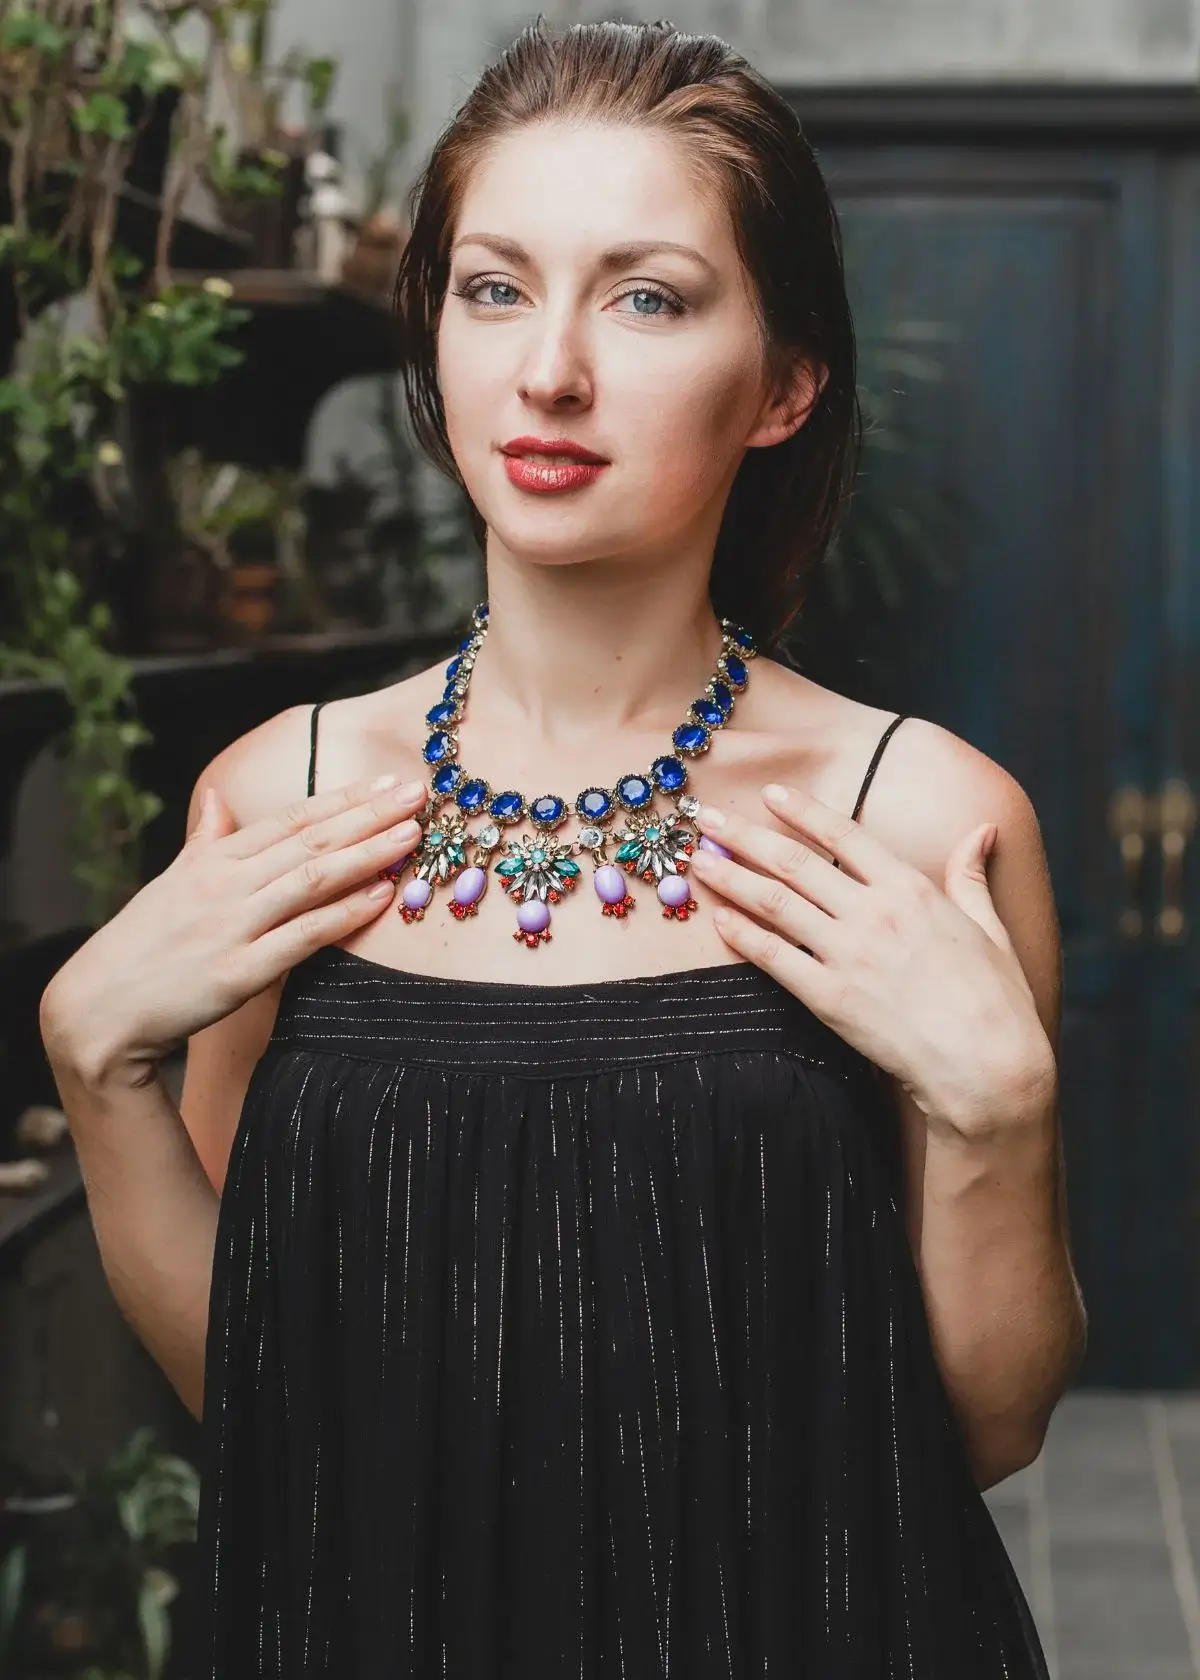 How to choose the right indie necklace?